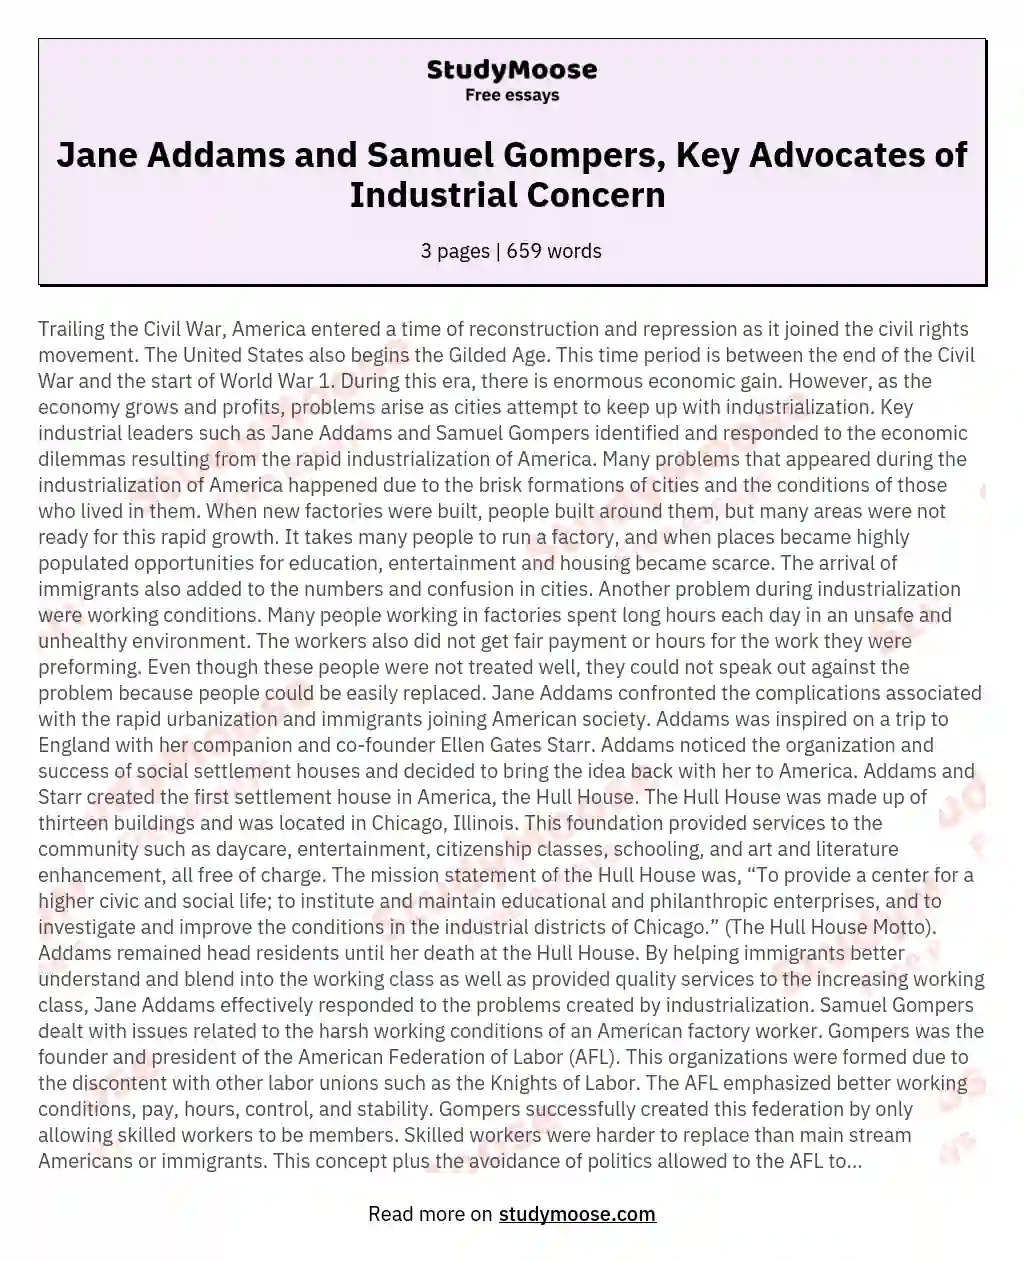 Jane Addams and Samuel Gompers, Key Advocates of Industrial Concern  essay